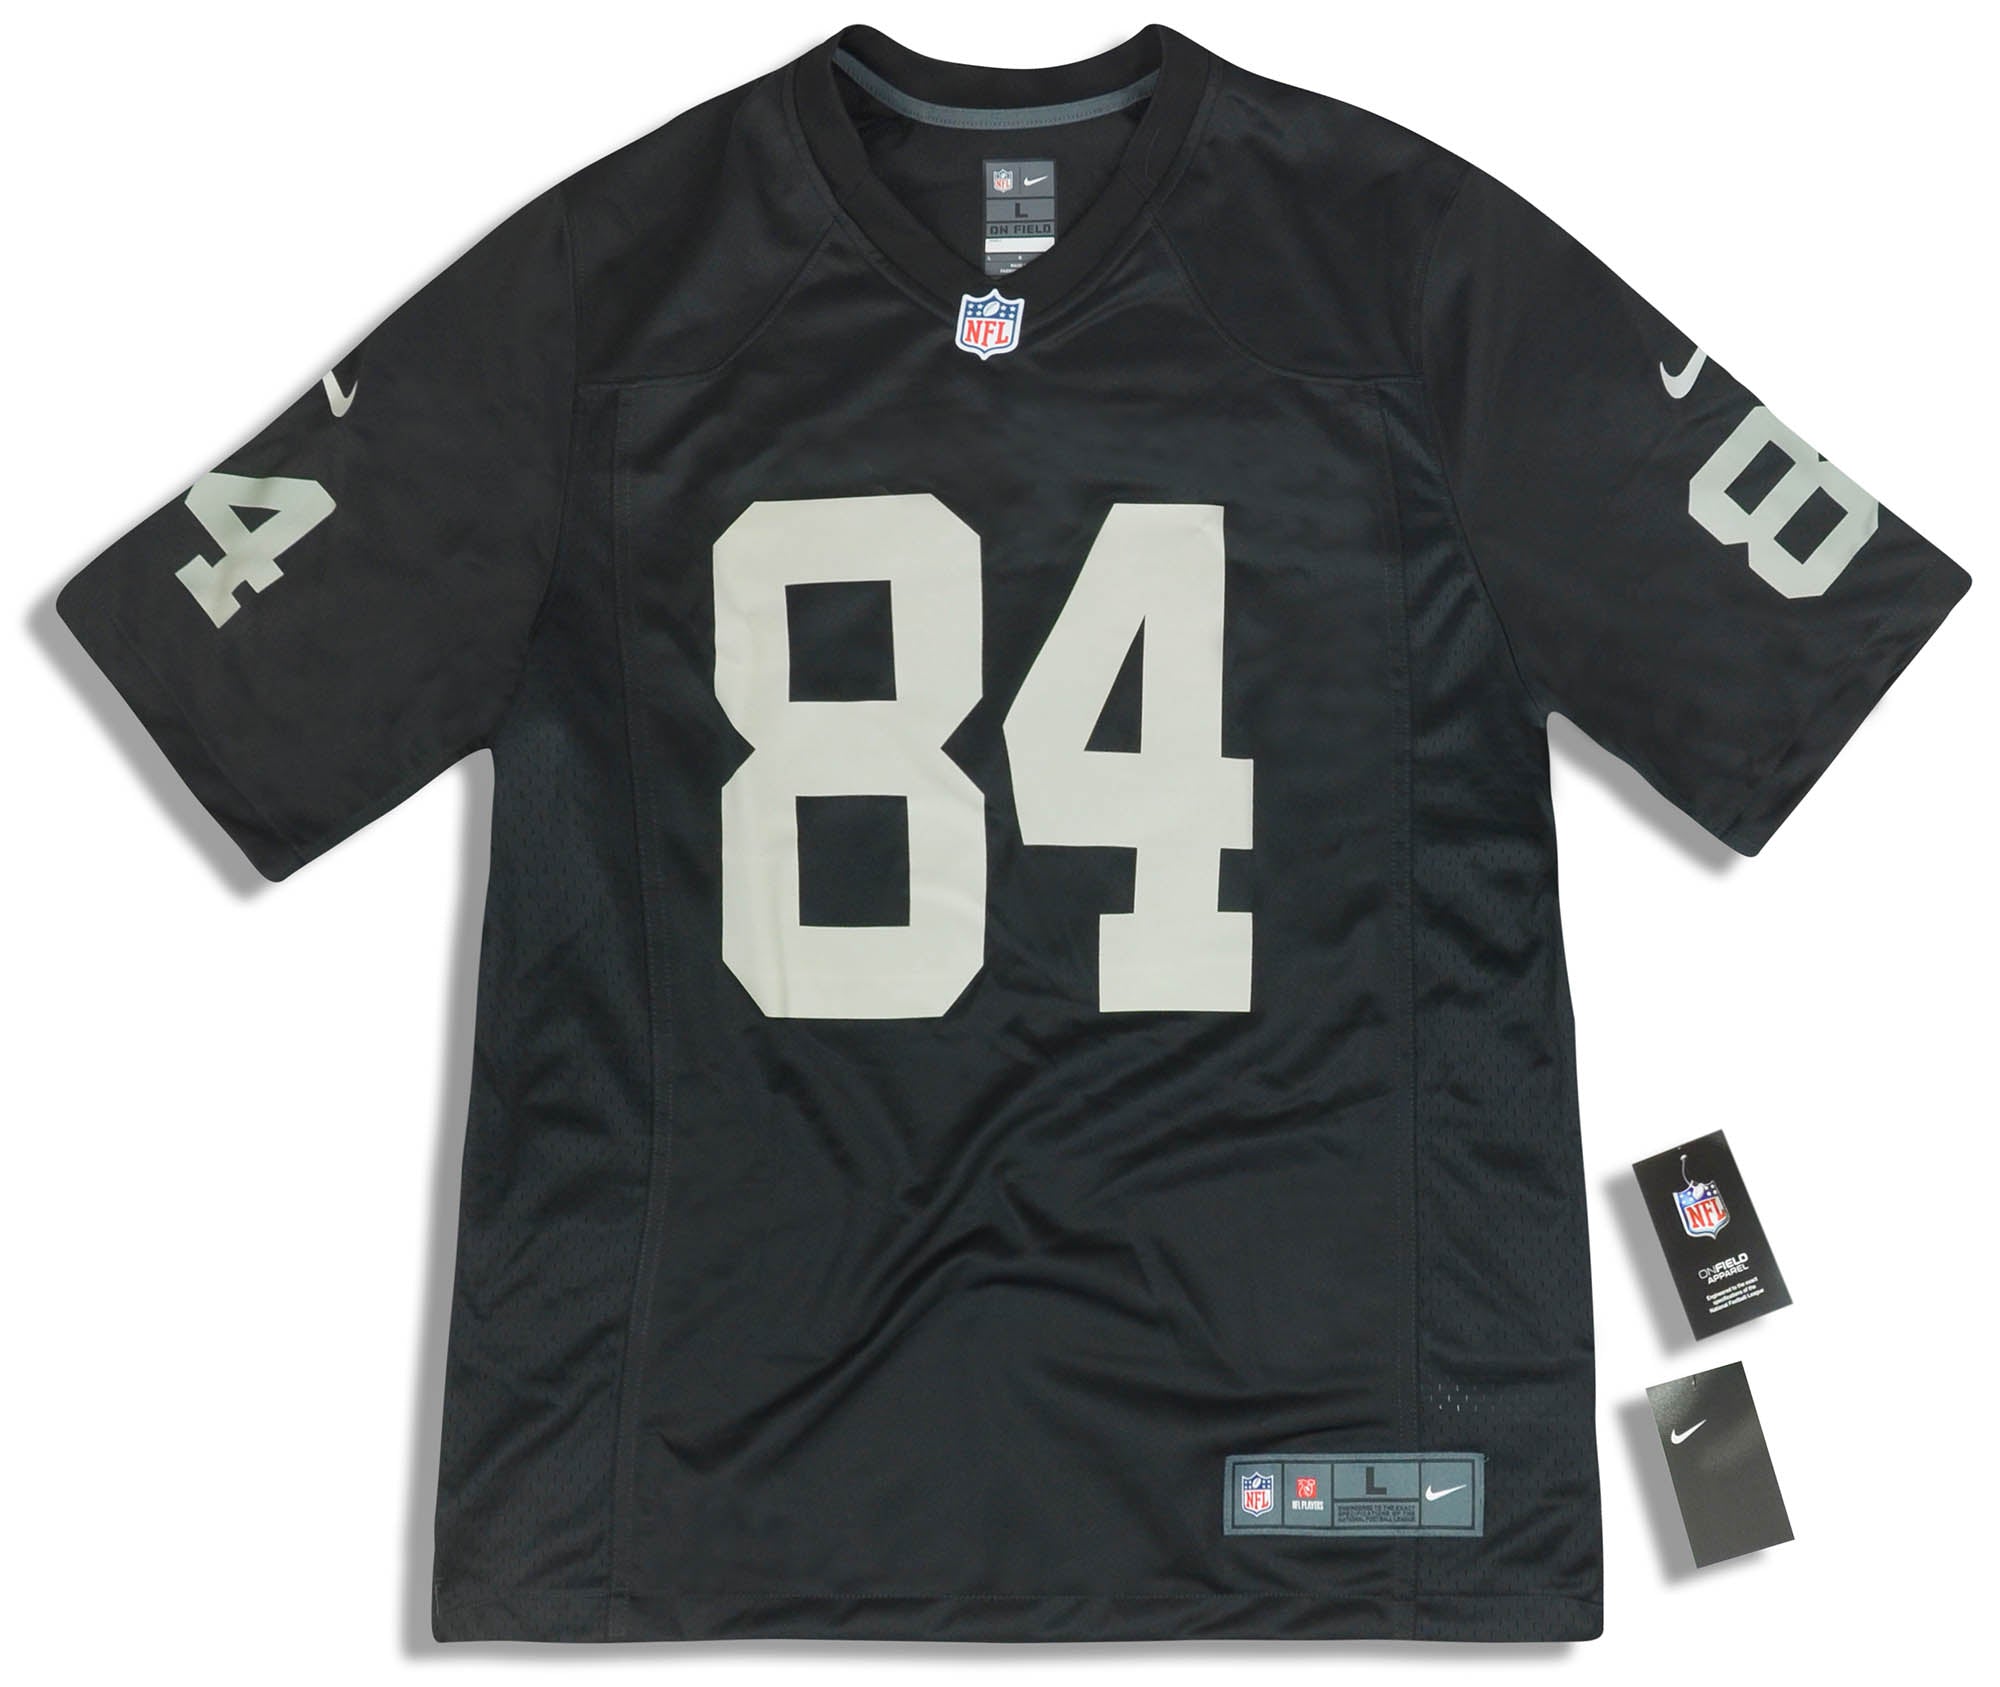 2019 OAKLAND RAIDERS BROWN #84 NIKE GAME JERSEY (HOME) L - W/TAGS